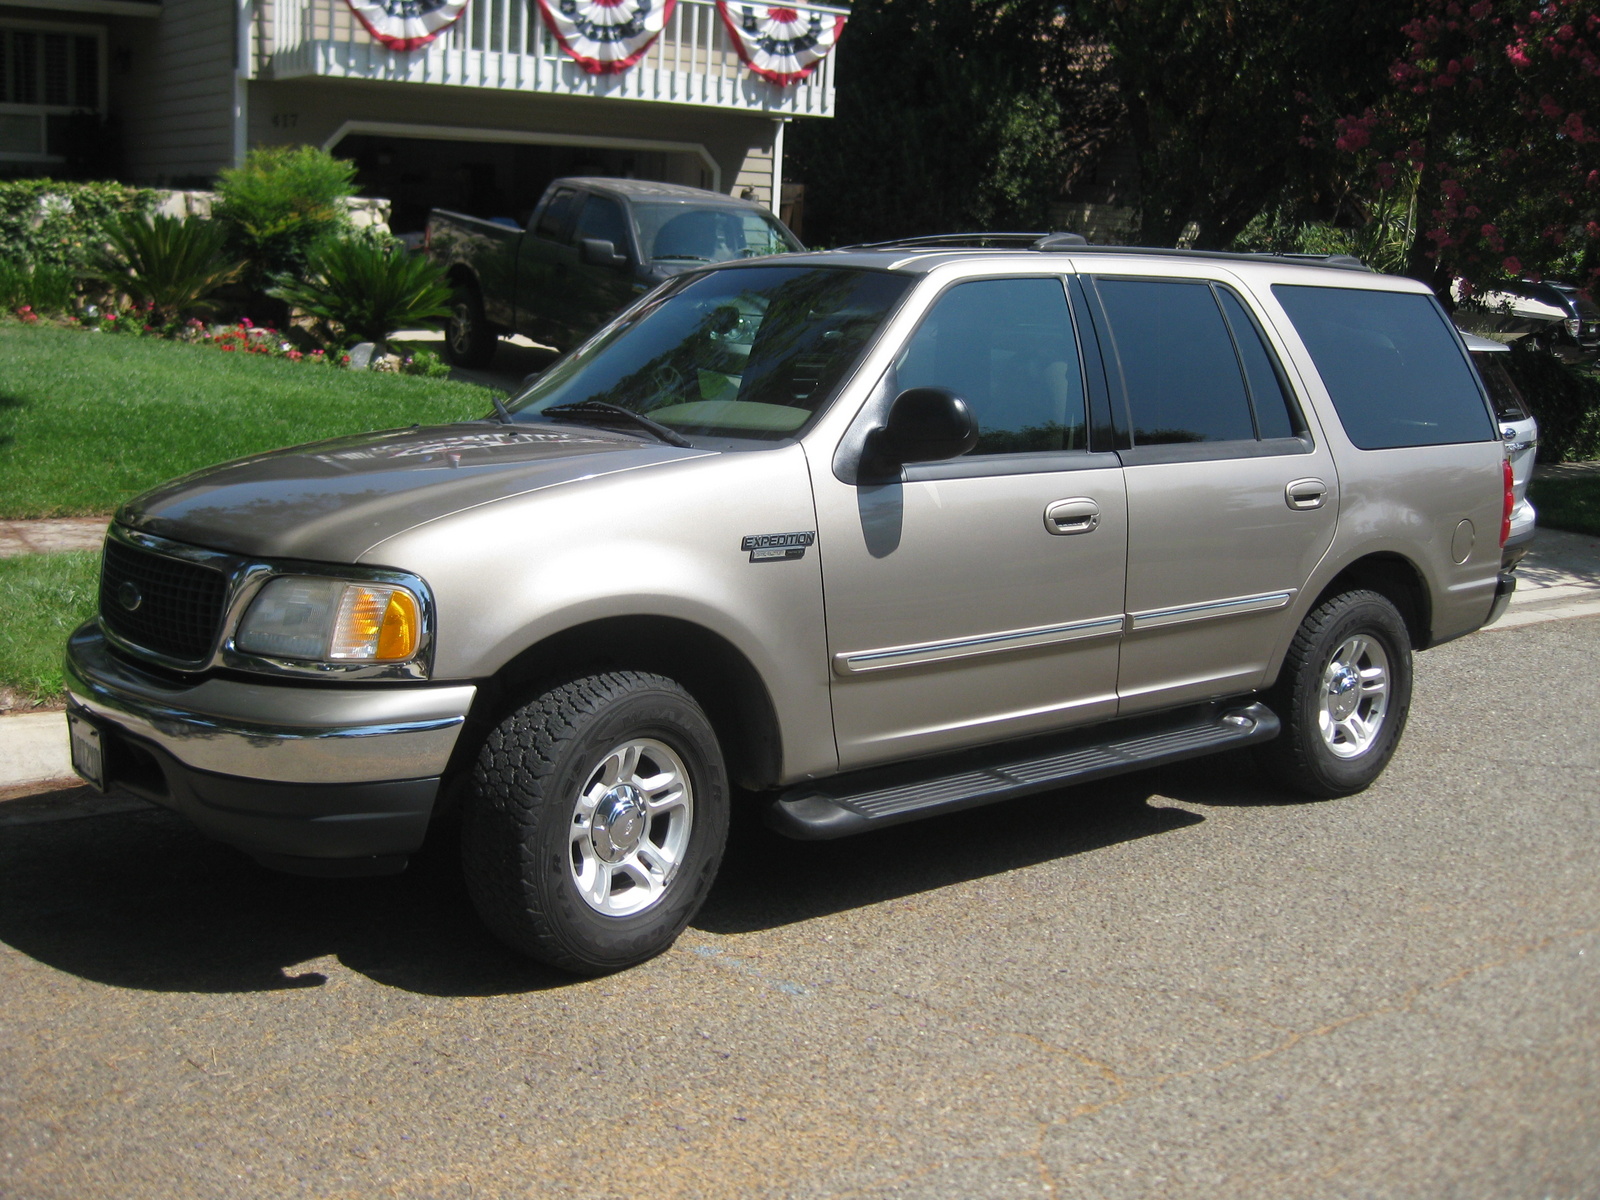 2001 Expedition ford picture #3